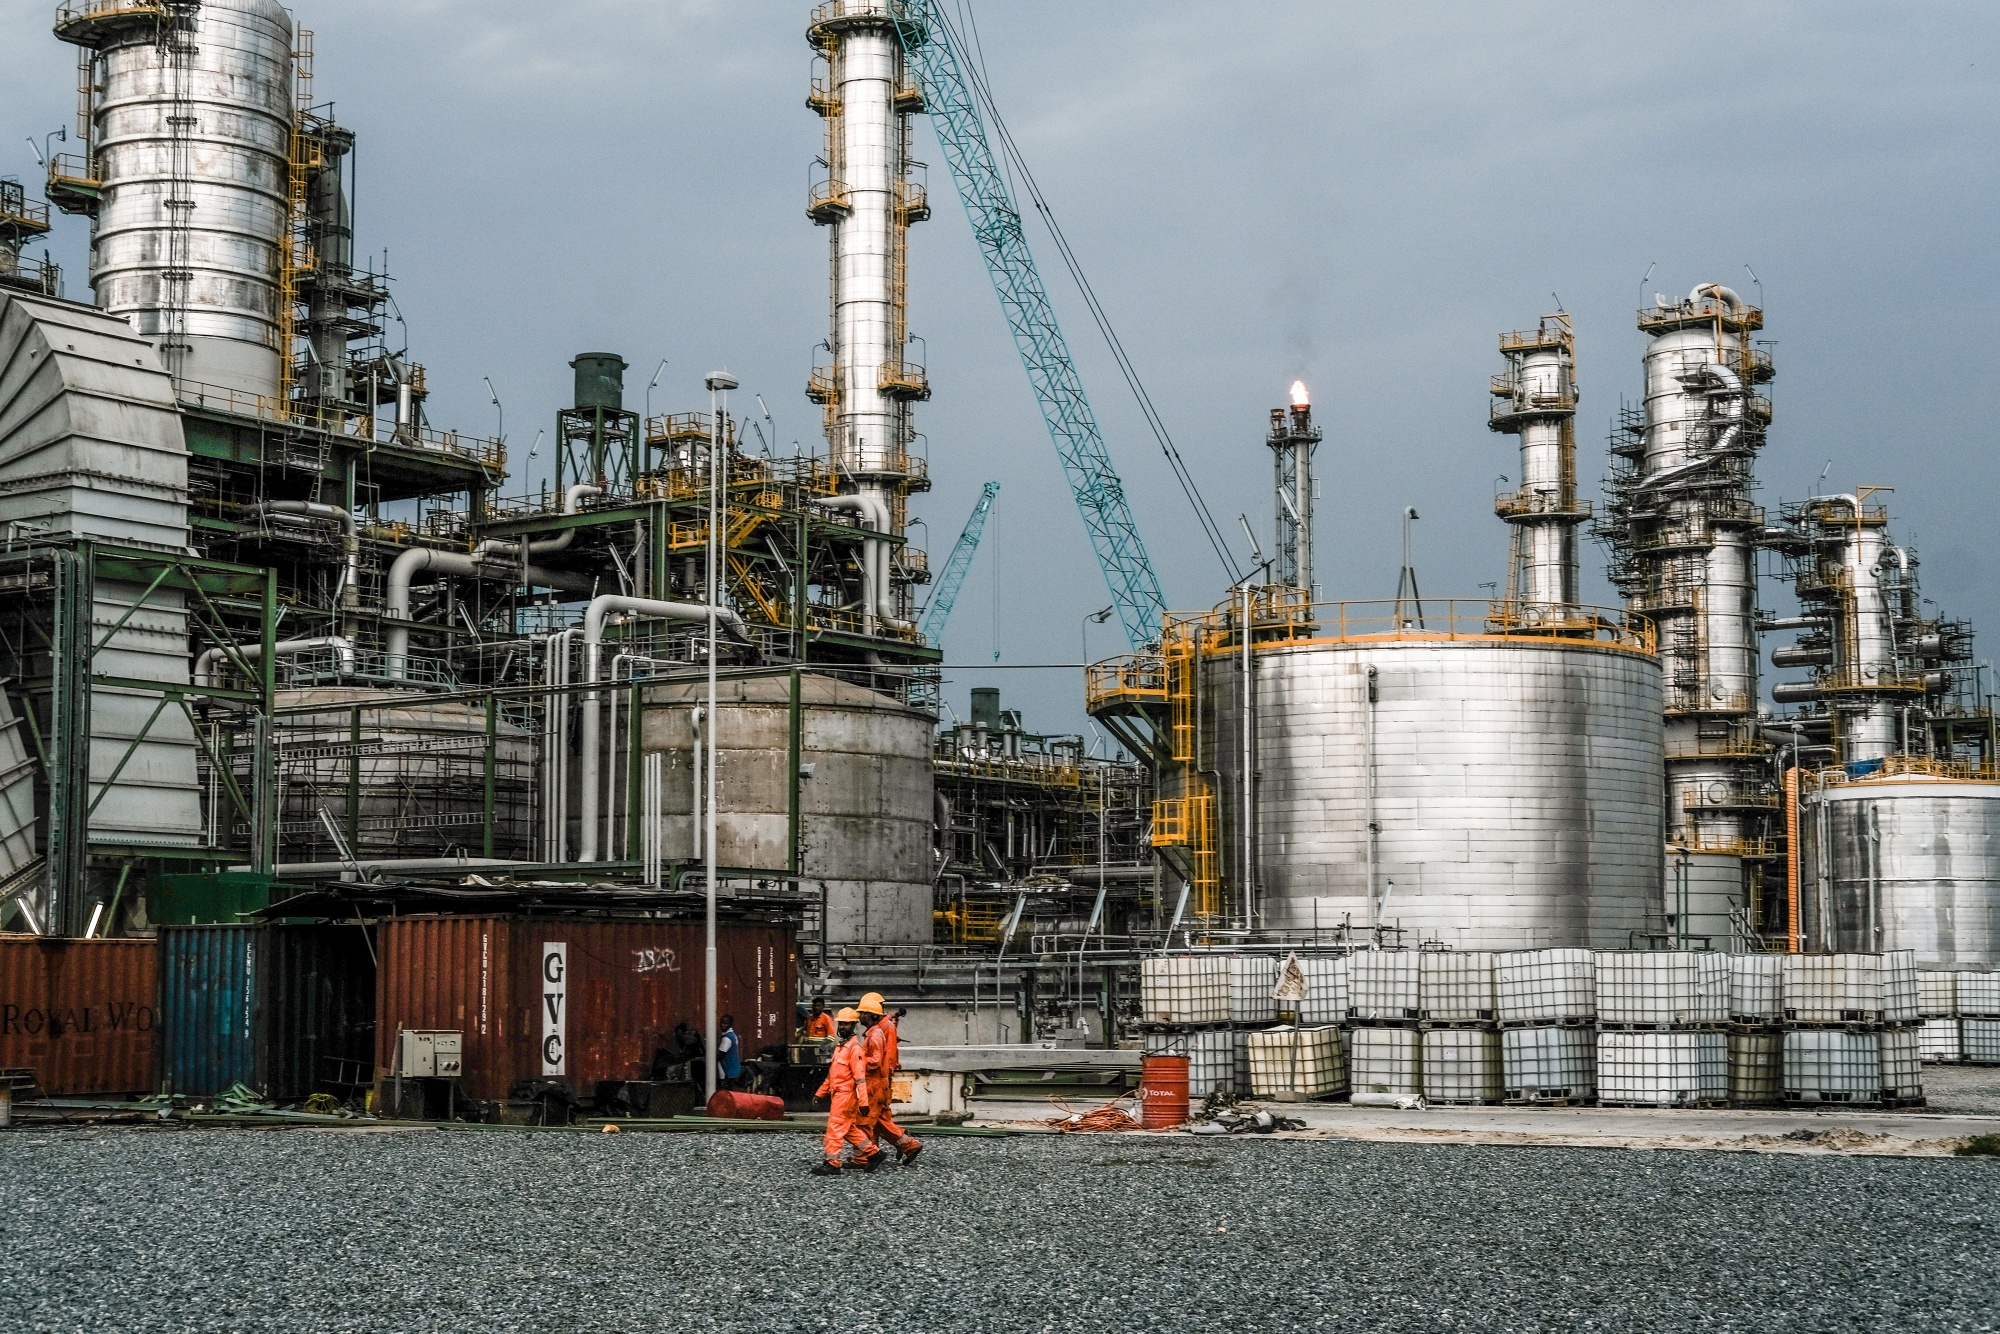 The under-construction Dangote Industries oil refinery and fertilizer plant site in the Ibeju Lekki district, outside of Lagos, Nigeria, on March 6.